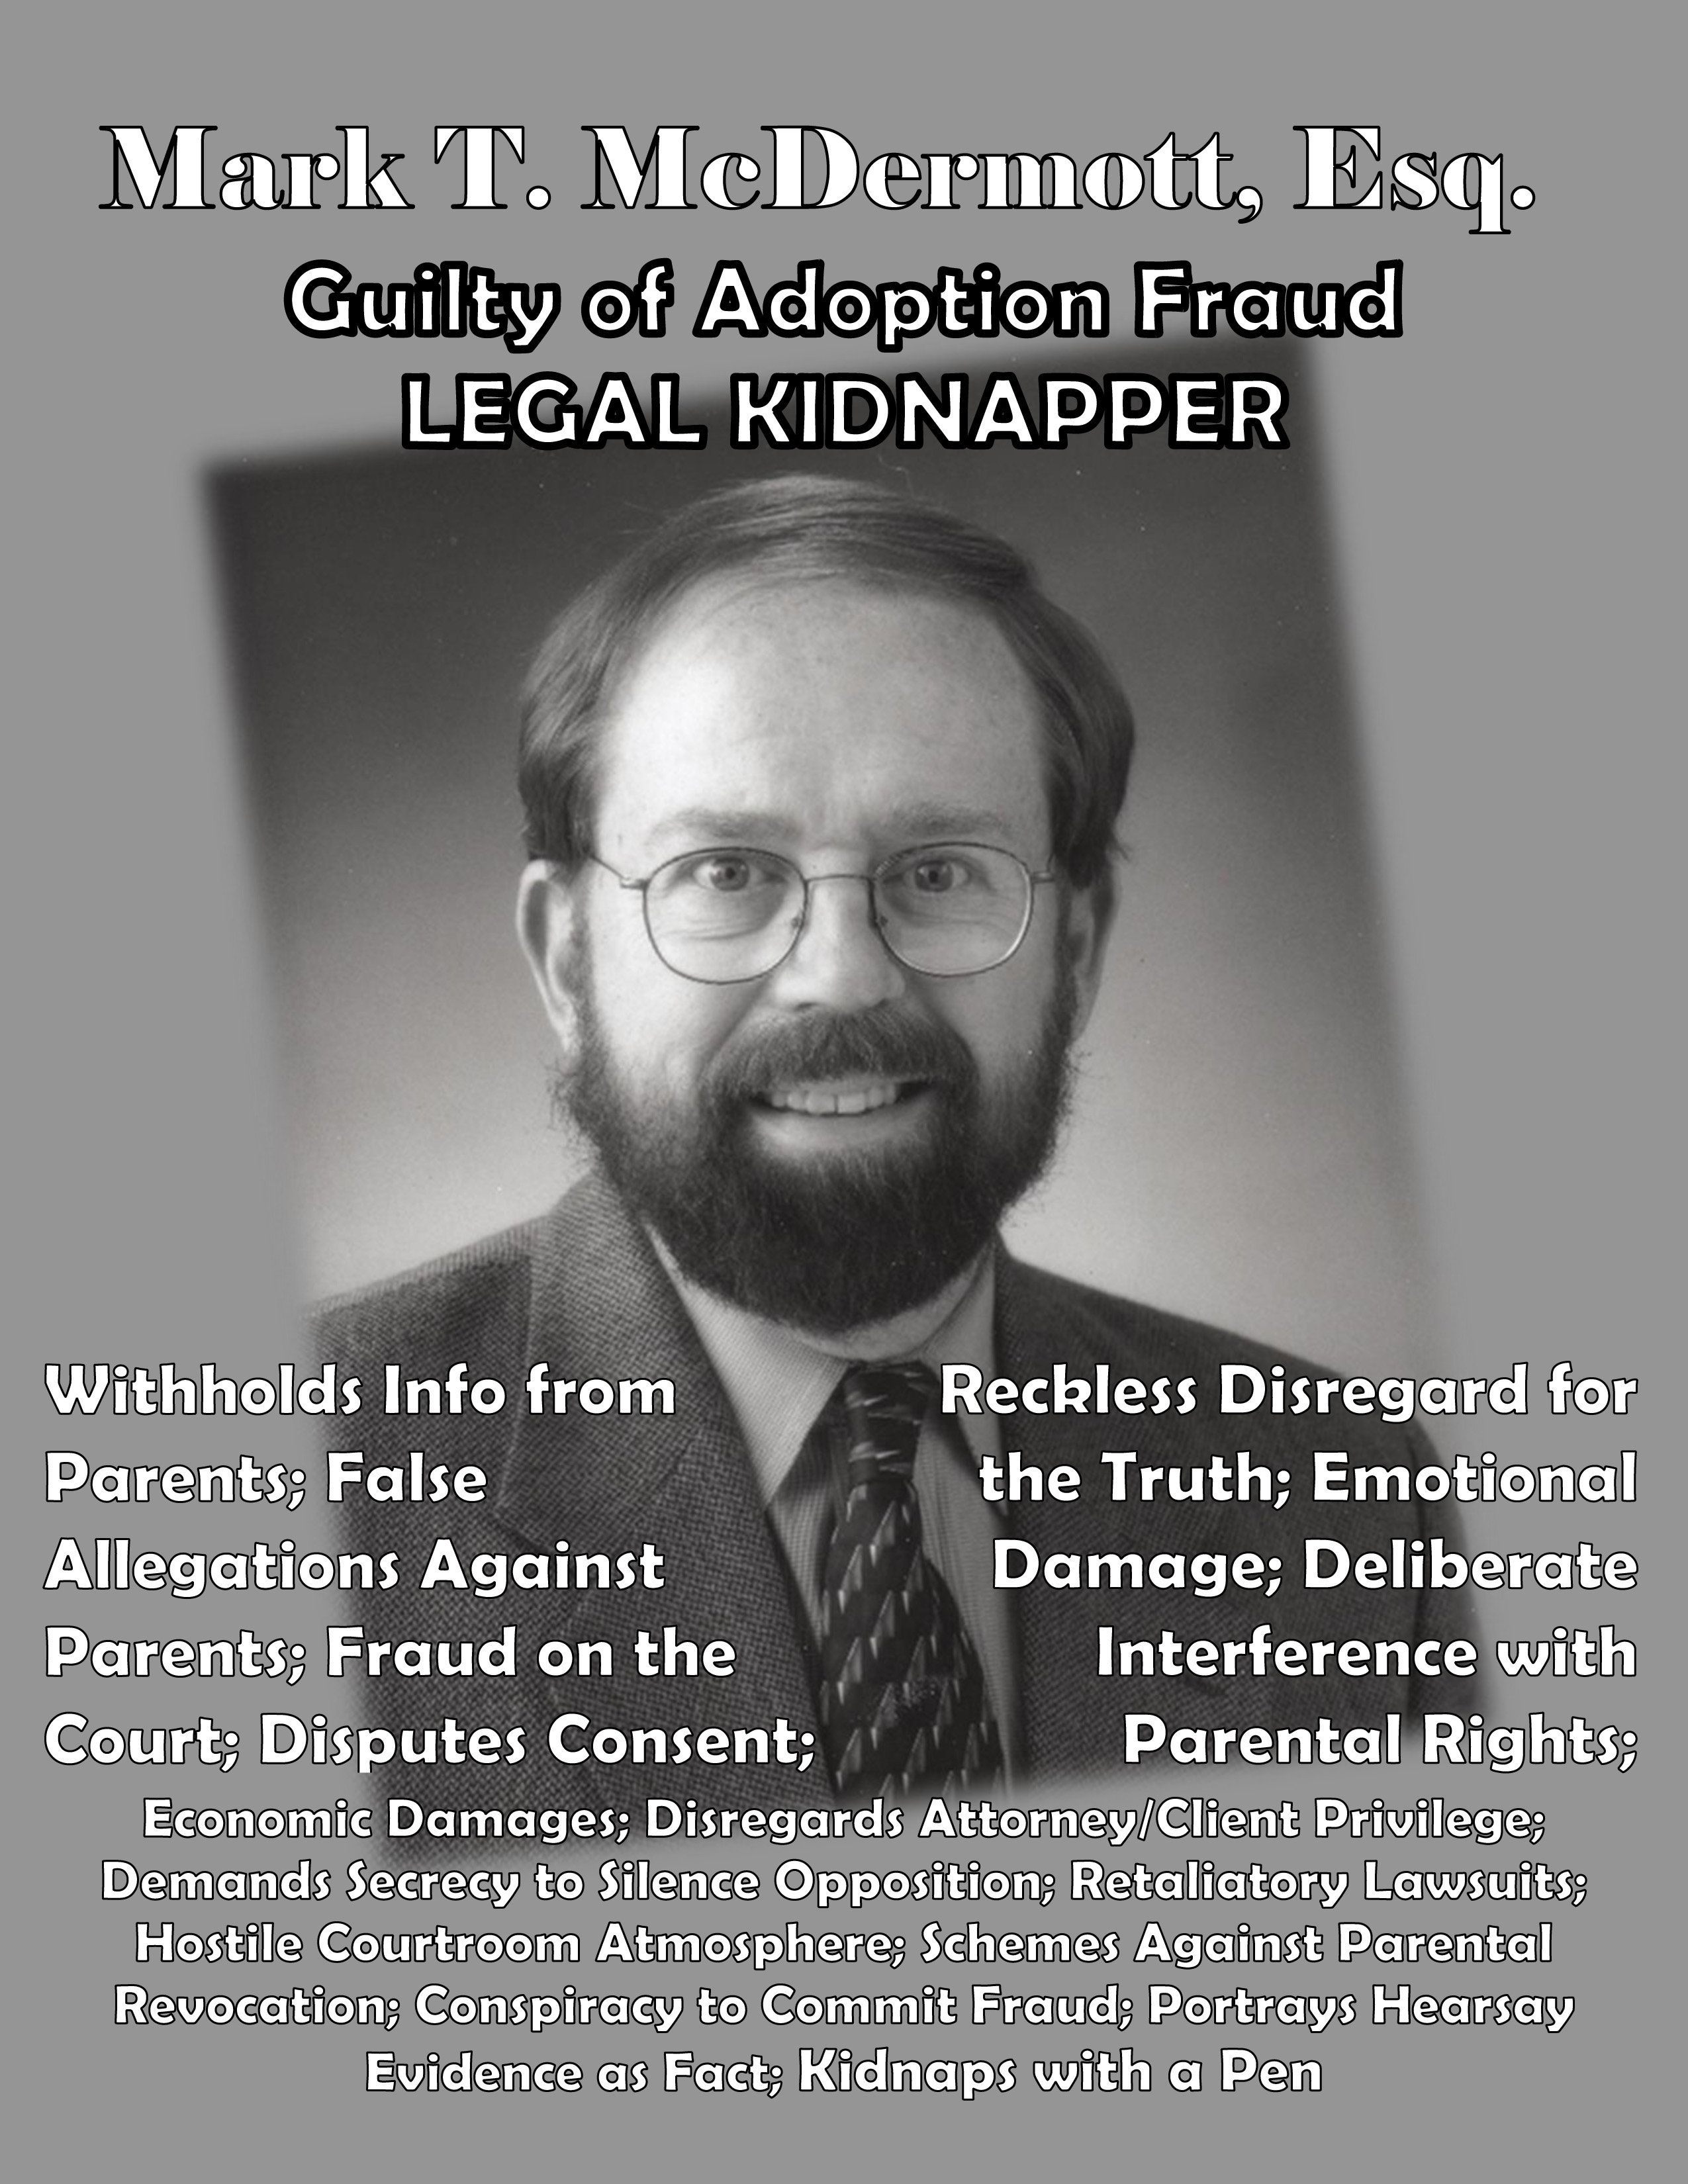 Mark T. McDermott Esq, a man with 20 years of identified adoption fraud